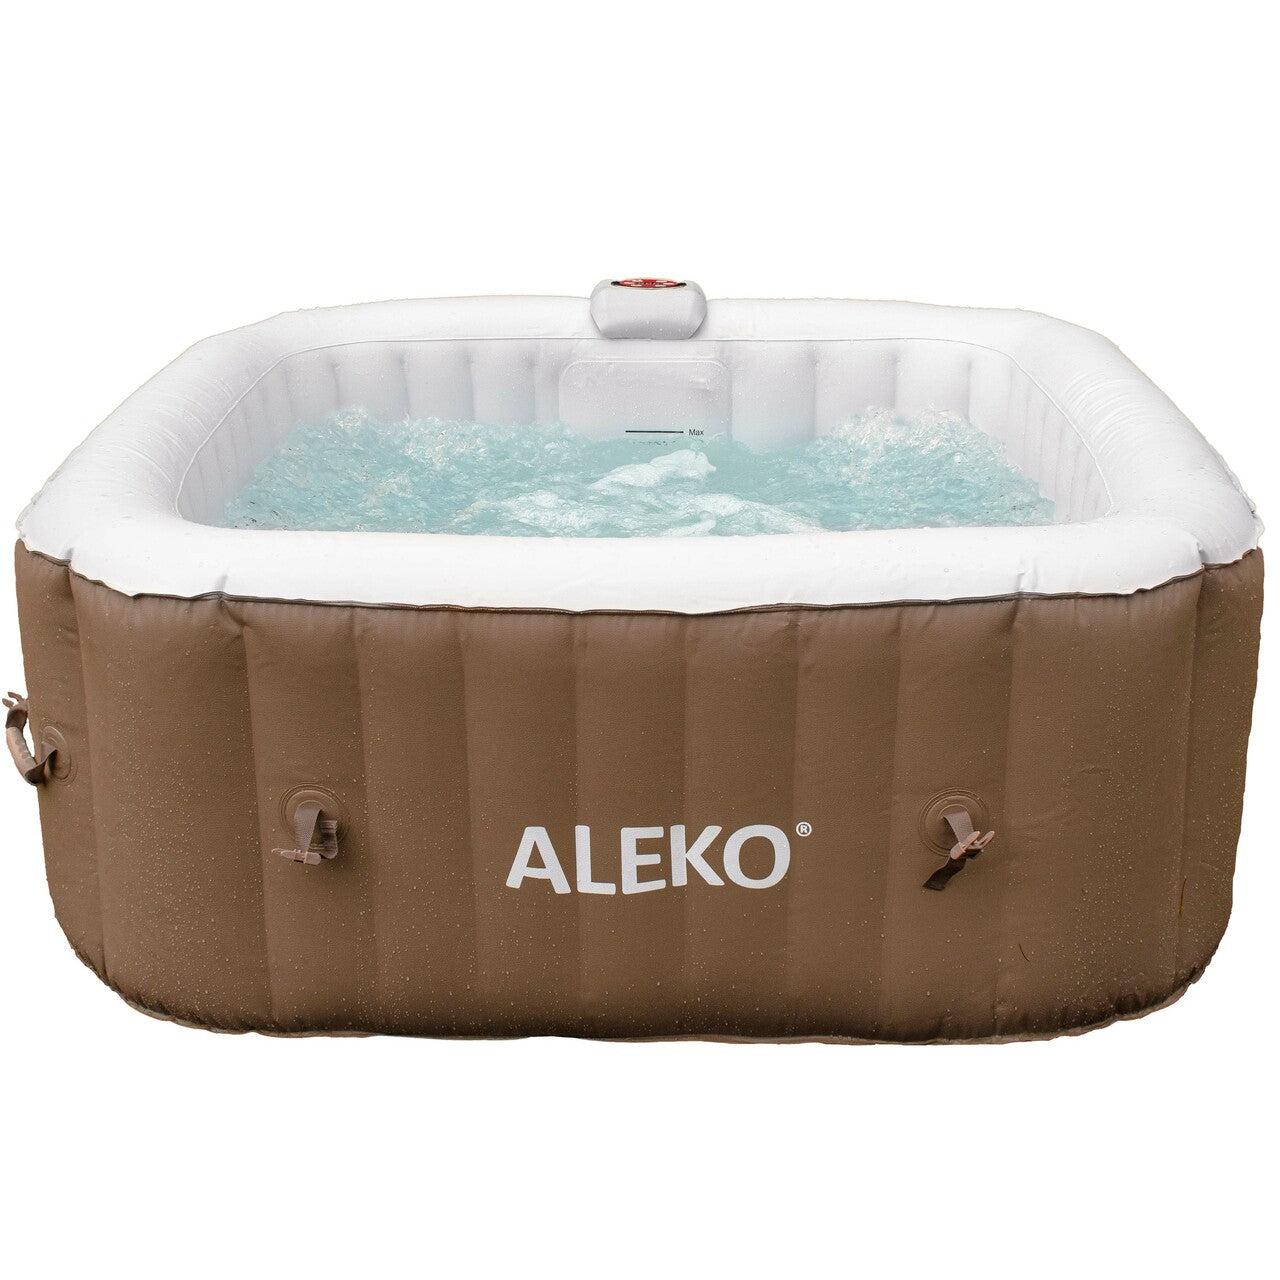 ALEKO 4 Person Brown 160 Gallon Square Inflatable Jetted Hot Tub with Cover - Purely Relaxation